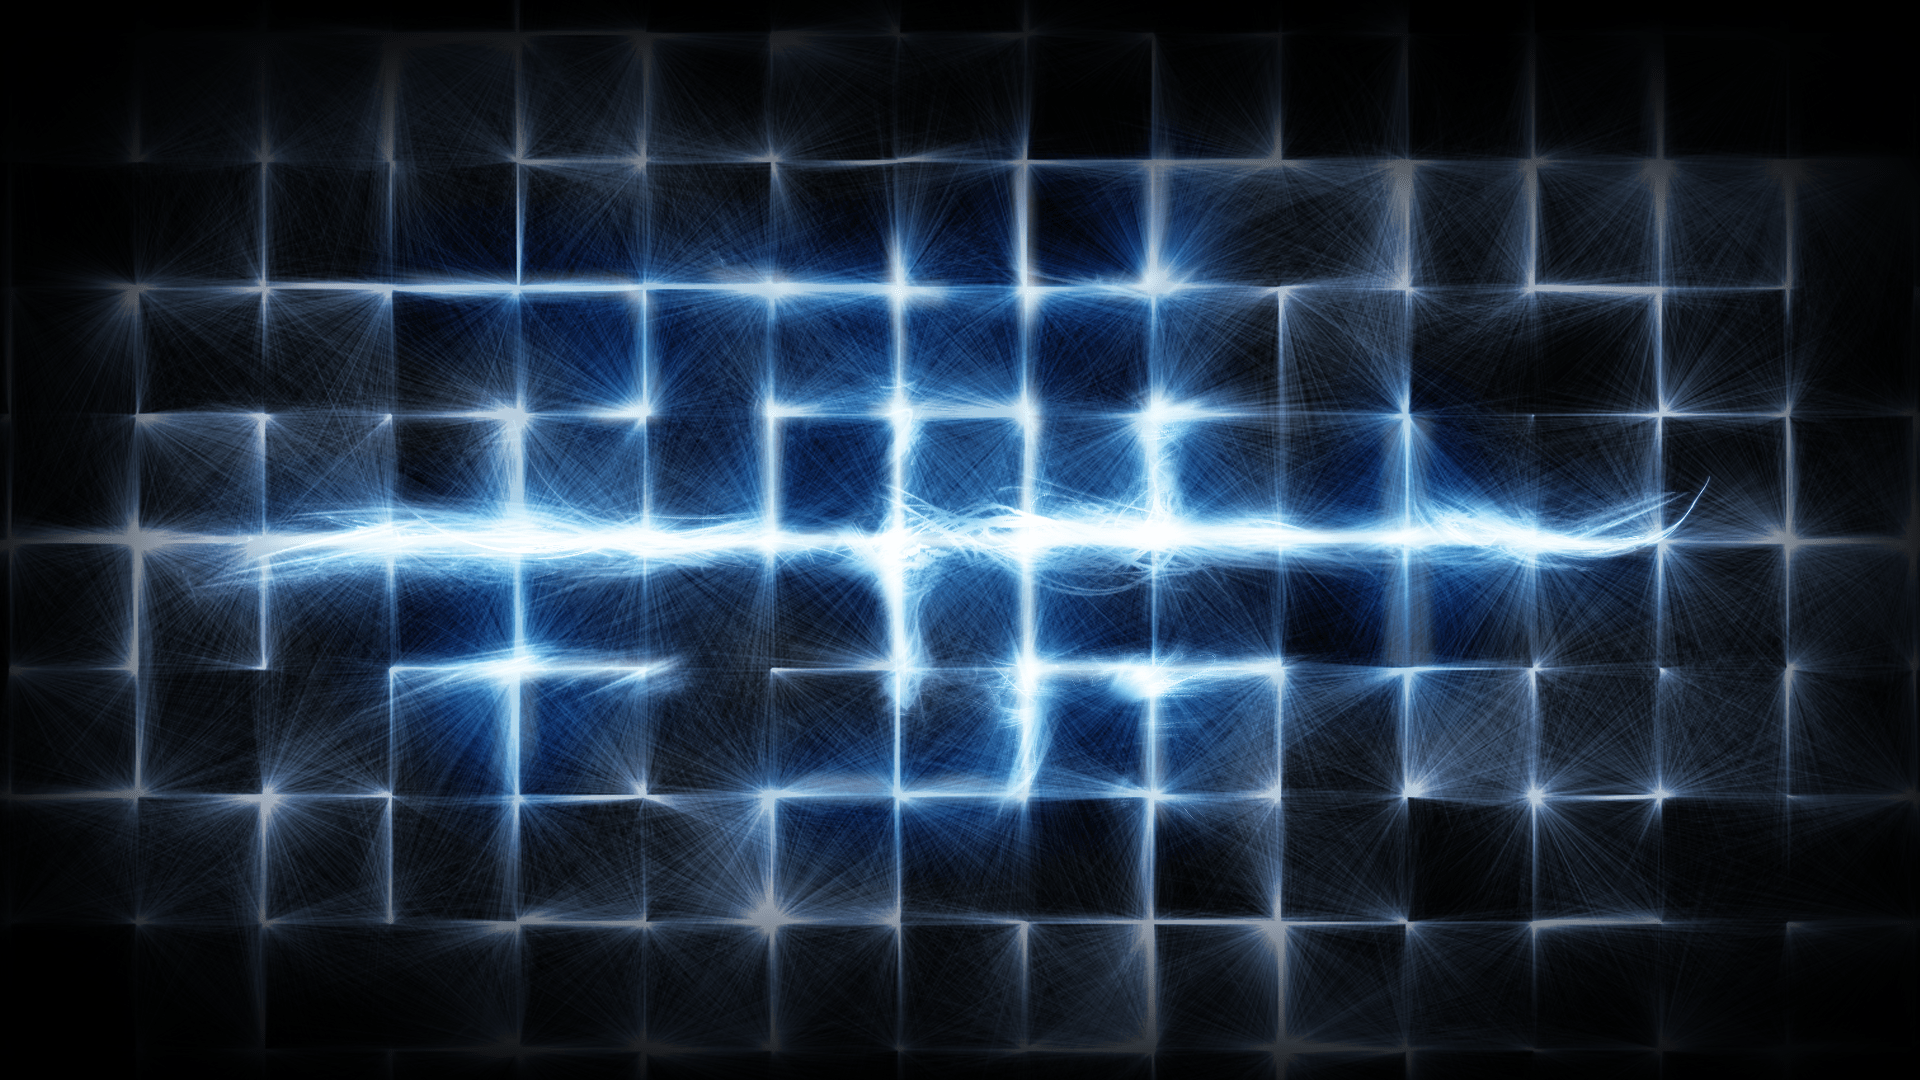 An abstract image of blue light on a black background - Grid